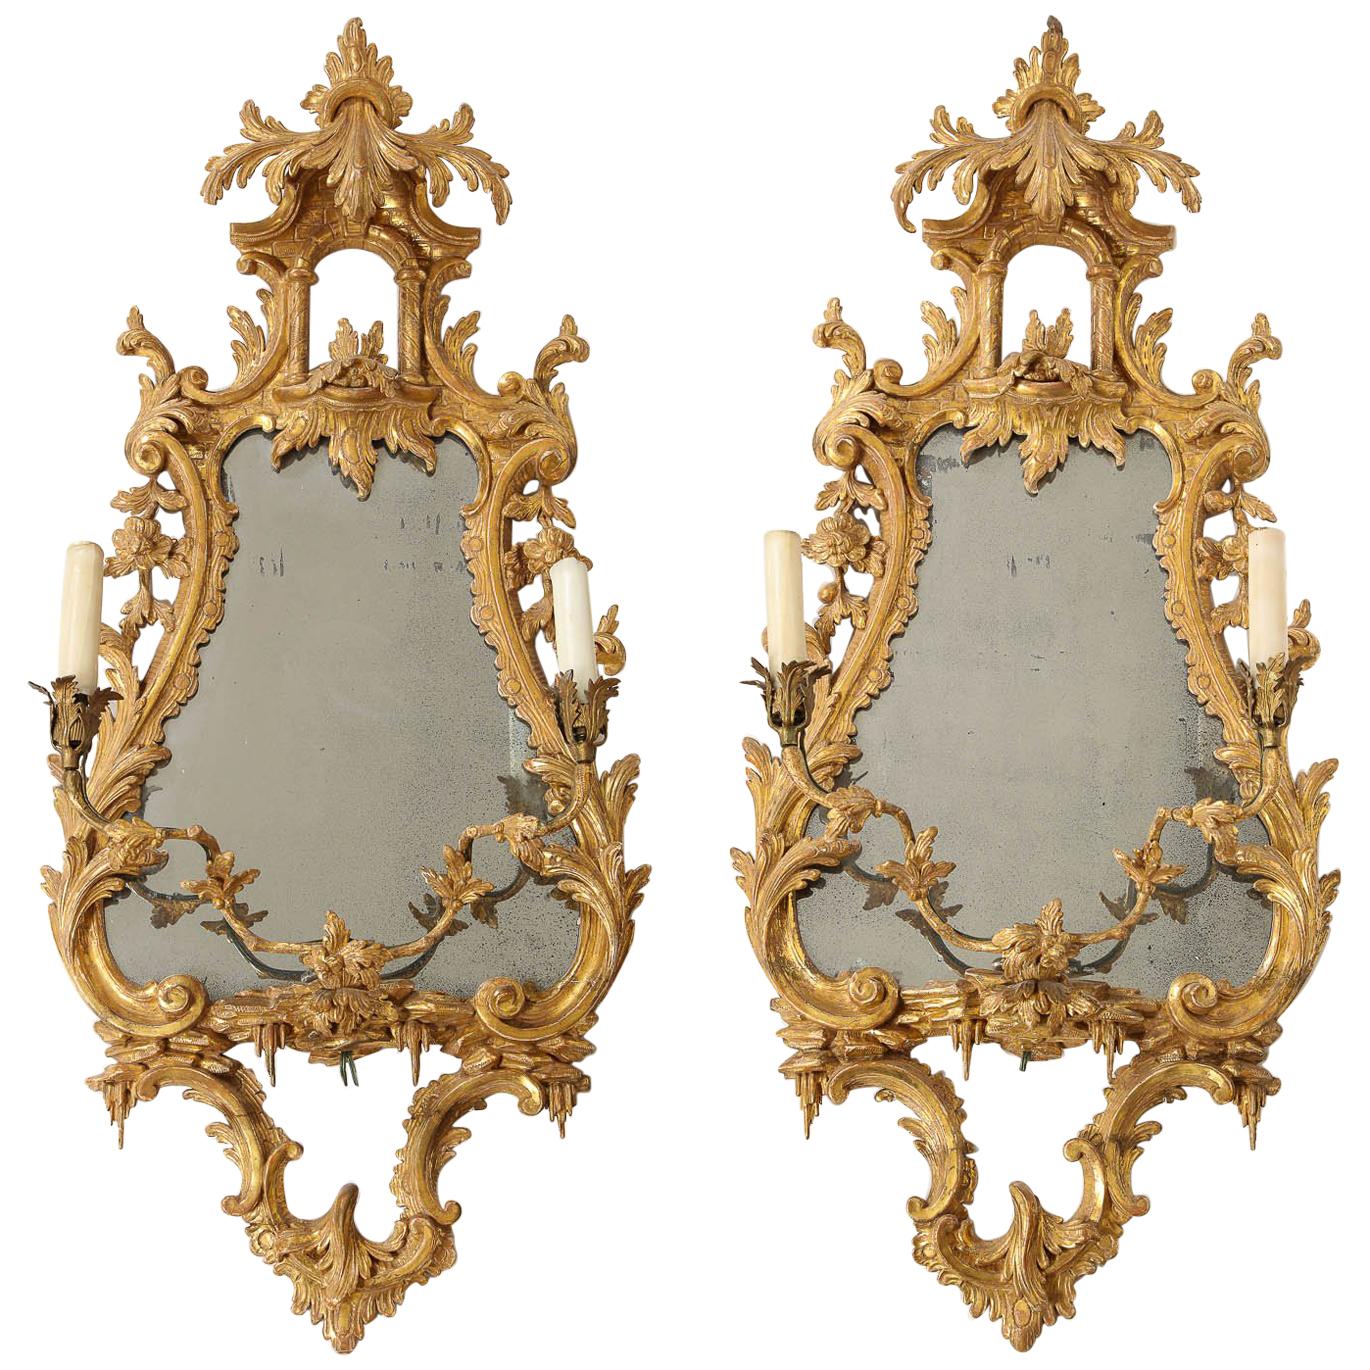 Pair of 18th Century English Giltwood Chinoiserie Mirrors with Candleholders For Sale